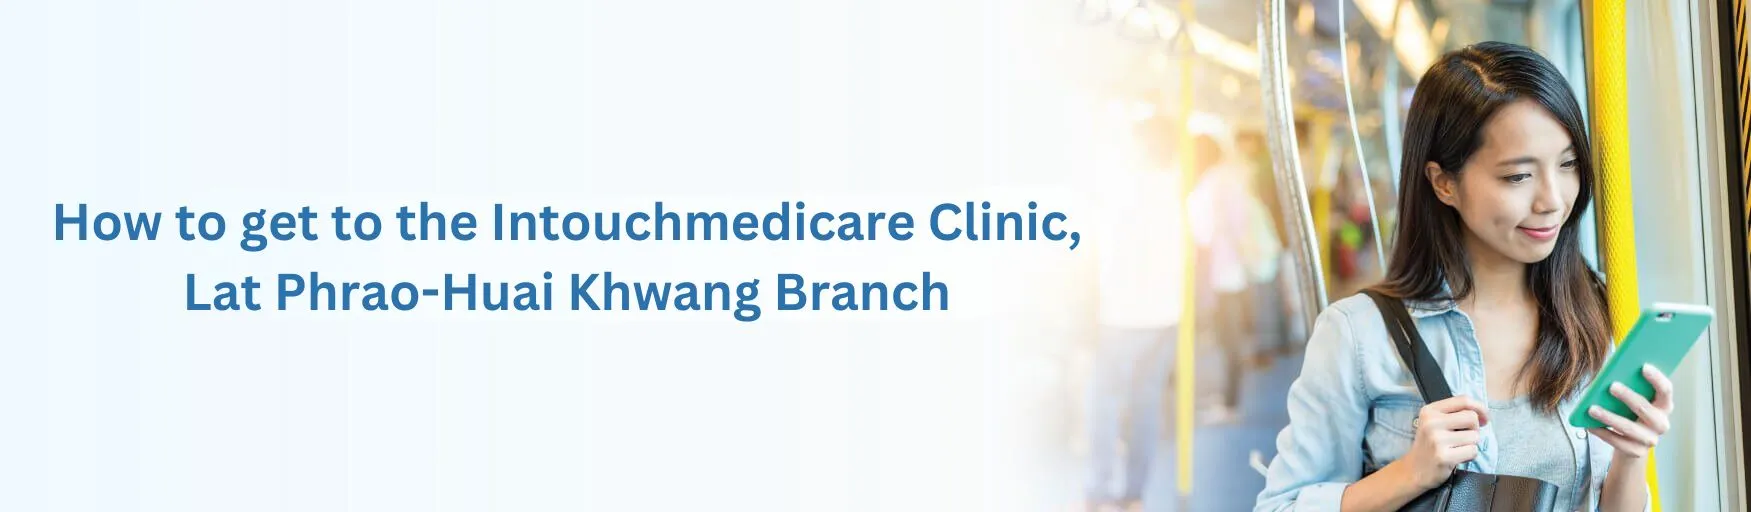 How to go to the Intouchmedicare Clinic Lat Phrao-Huai Khwang Branch